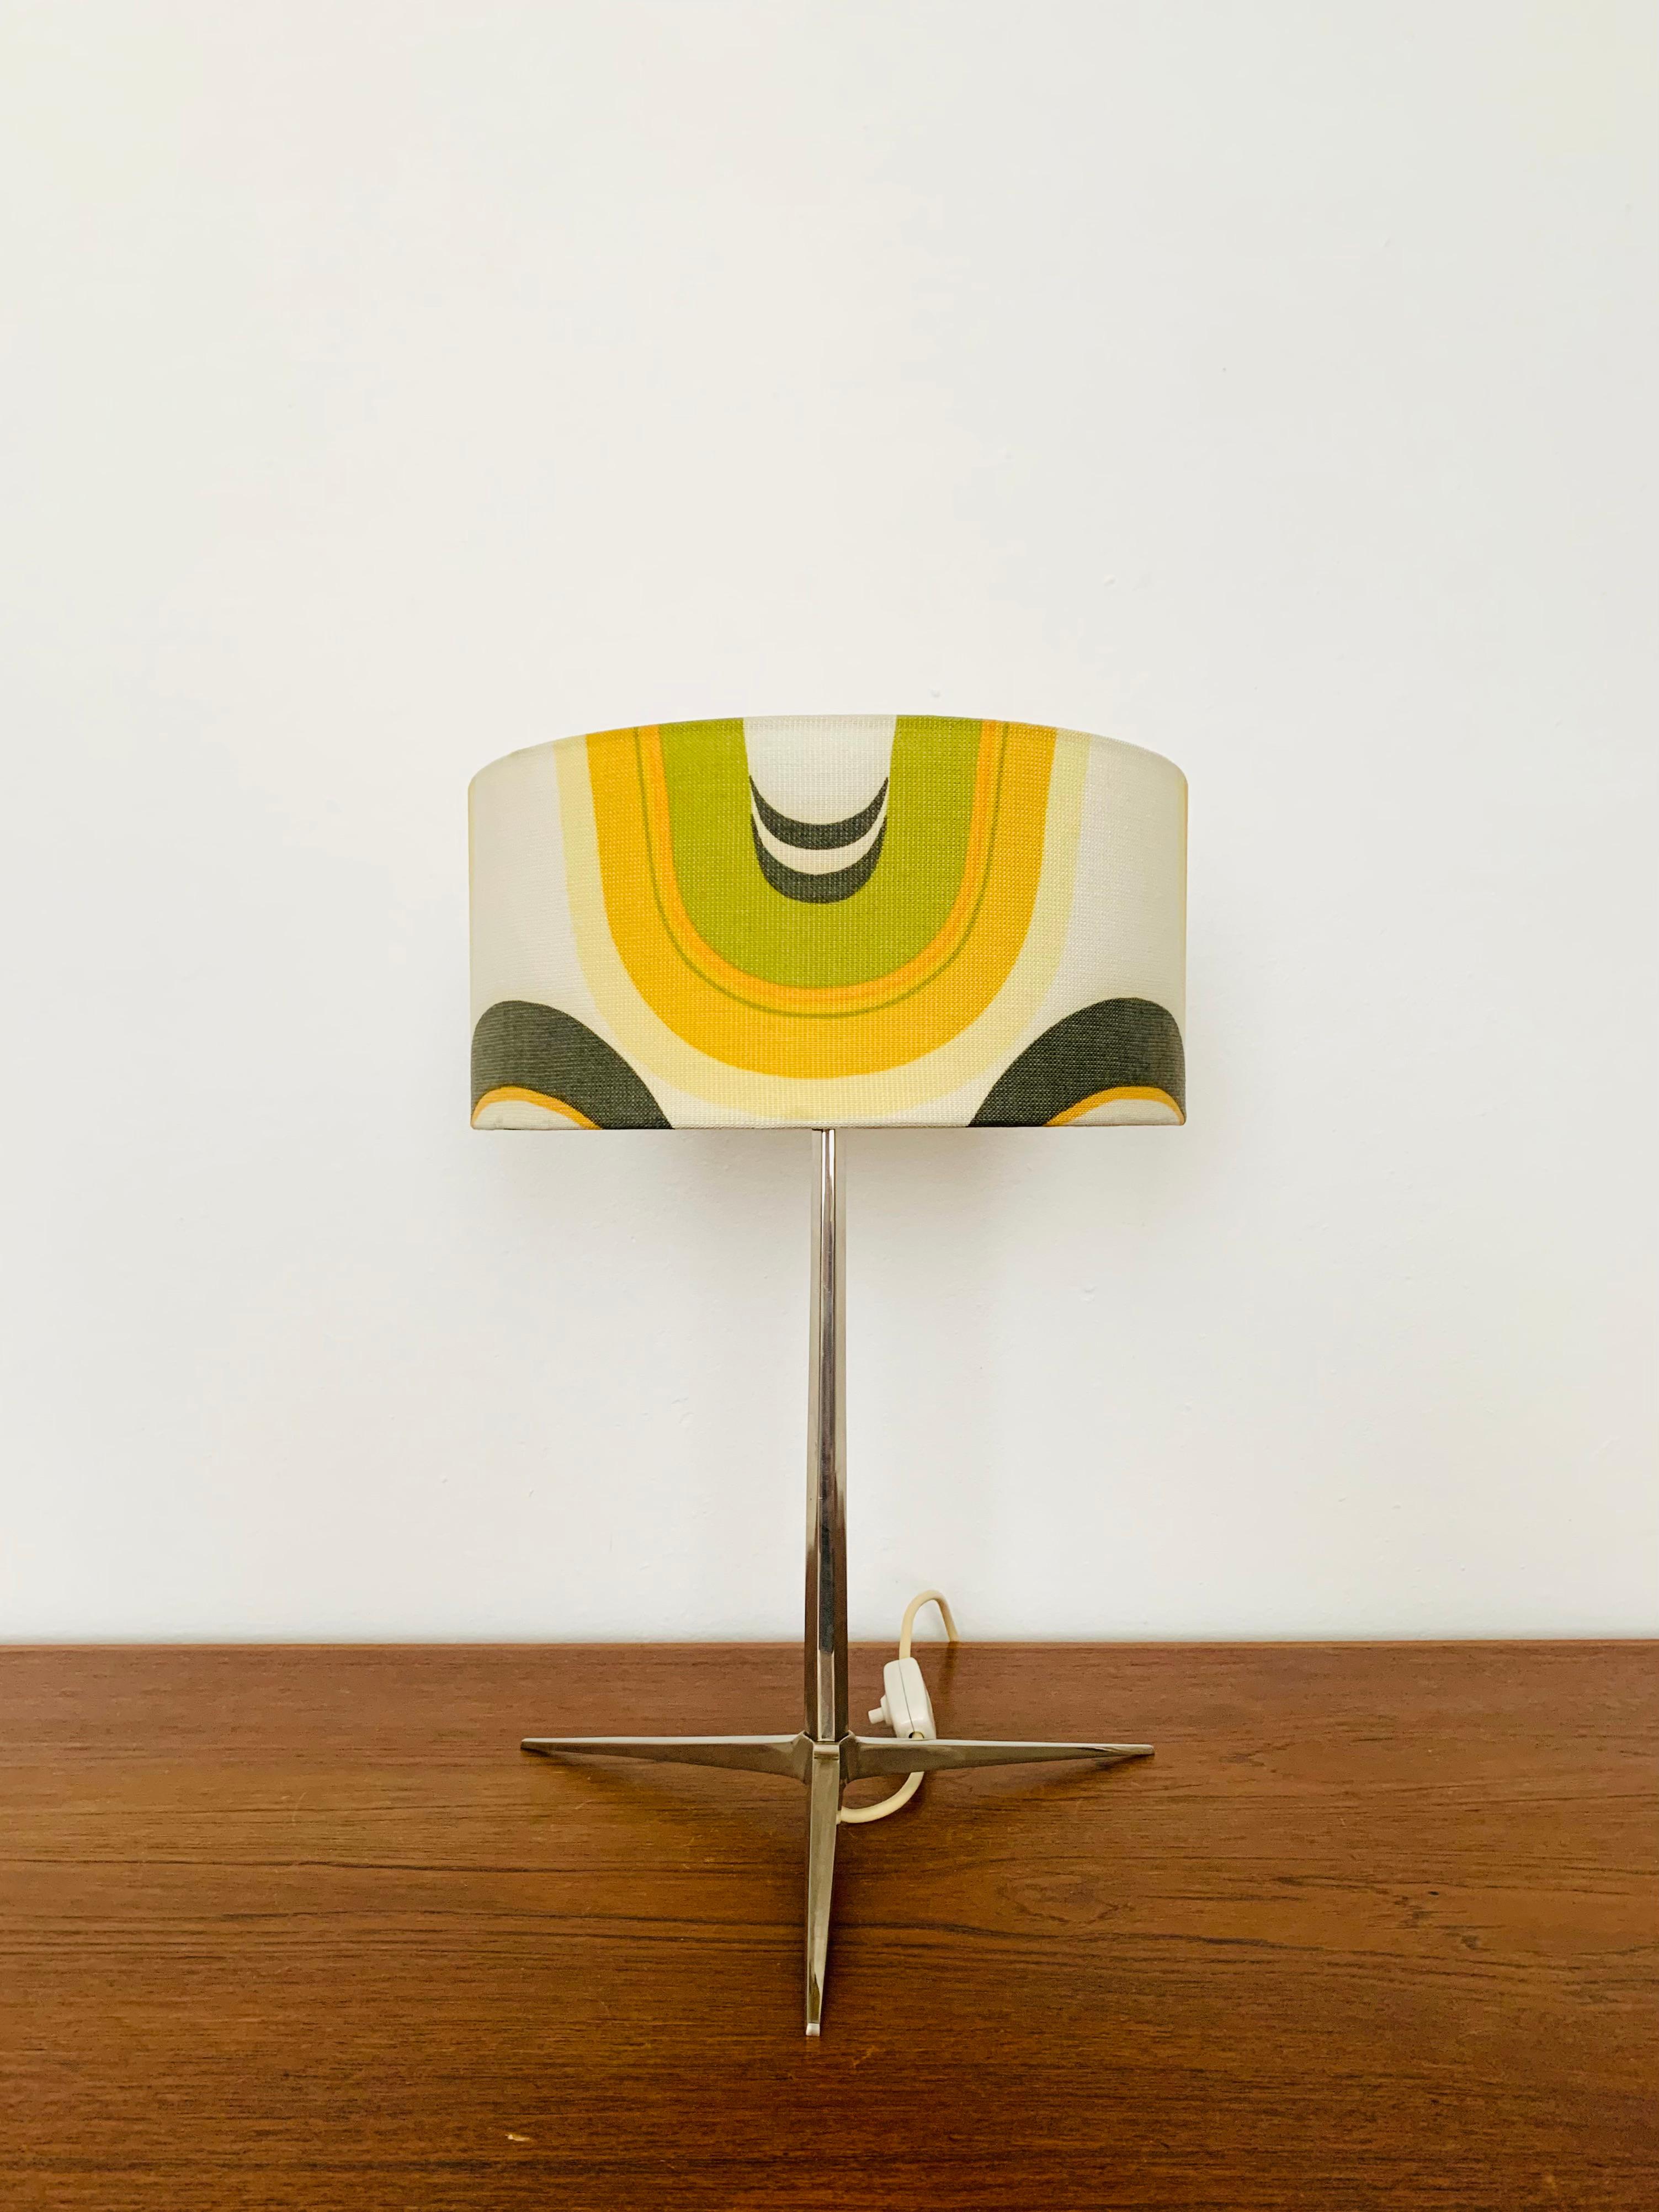 Very elegant table lamp from the 1960s.
Great design and high-quality workmanship.
The loving details and the very pleasant lighting effect make the lamp special and a real favorite.

Condition:

Very good vintage condition with slight signs